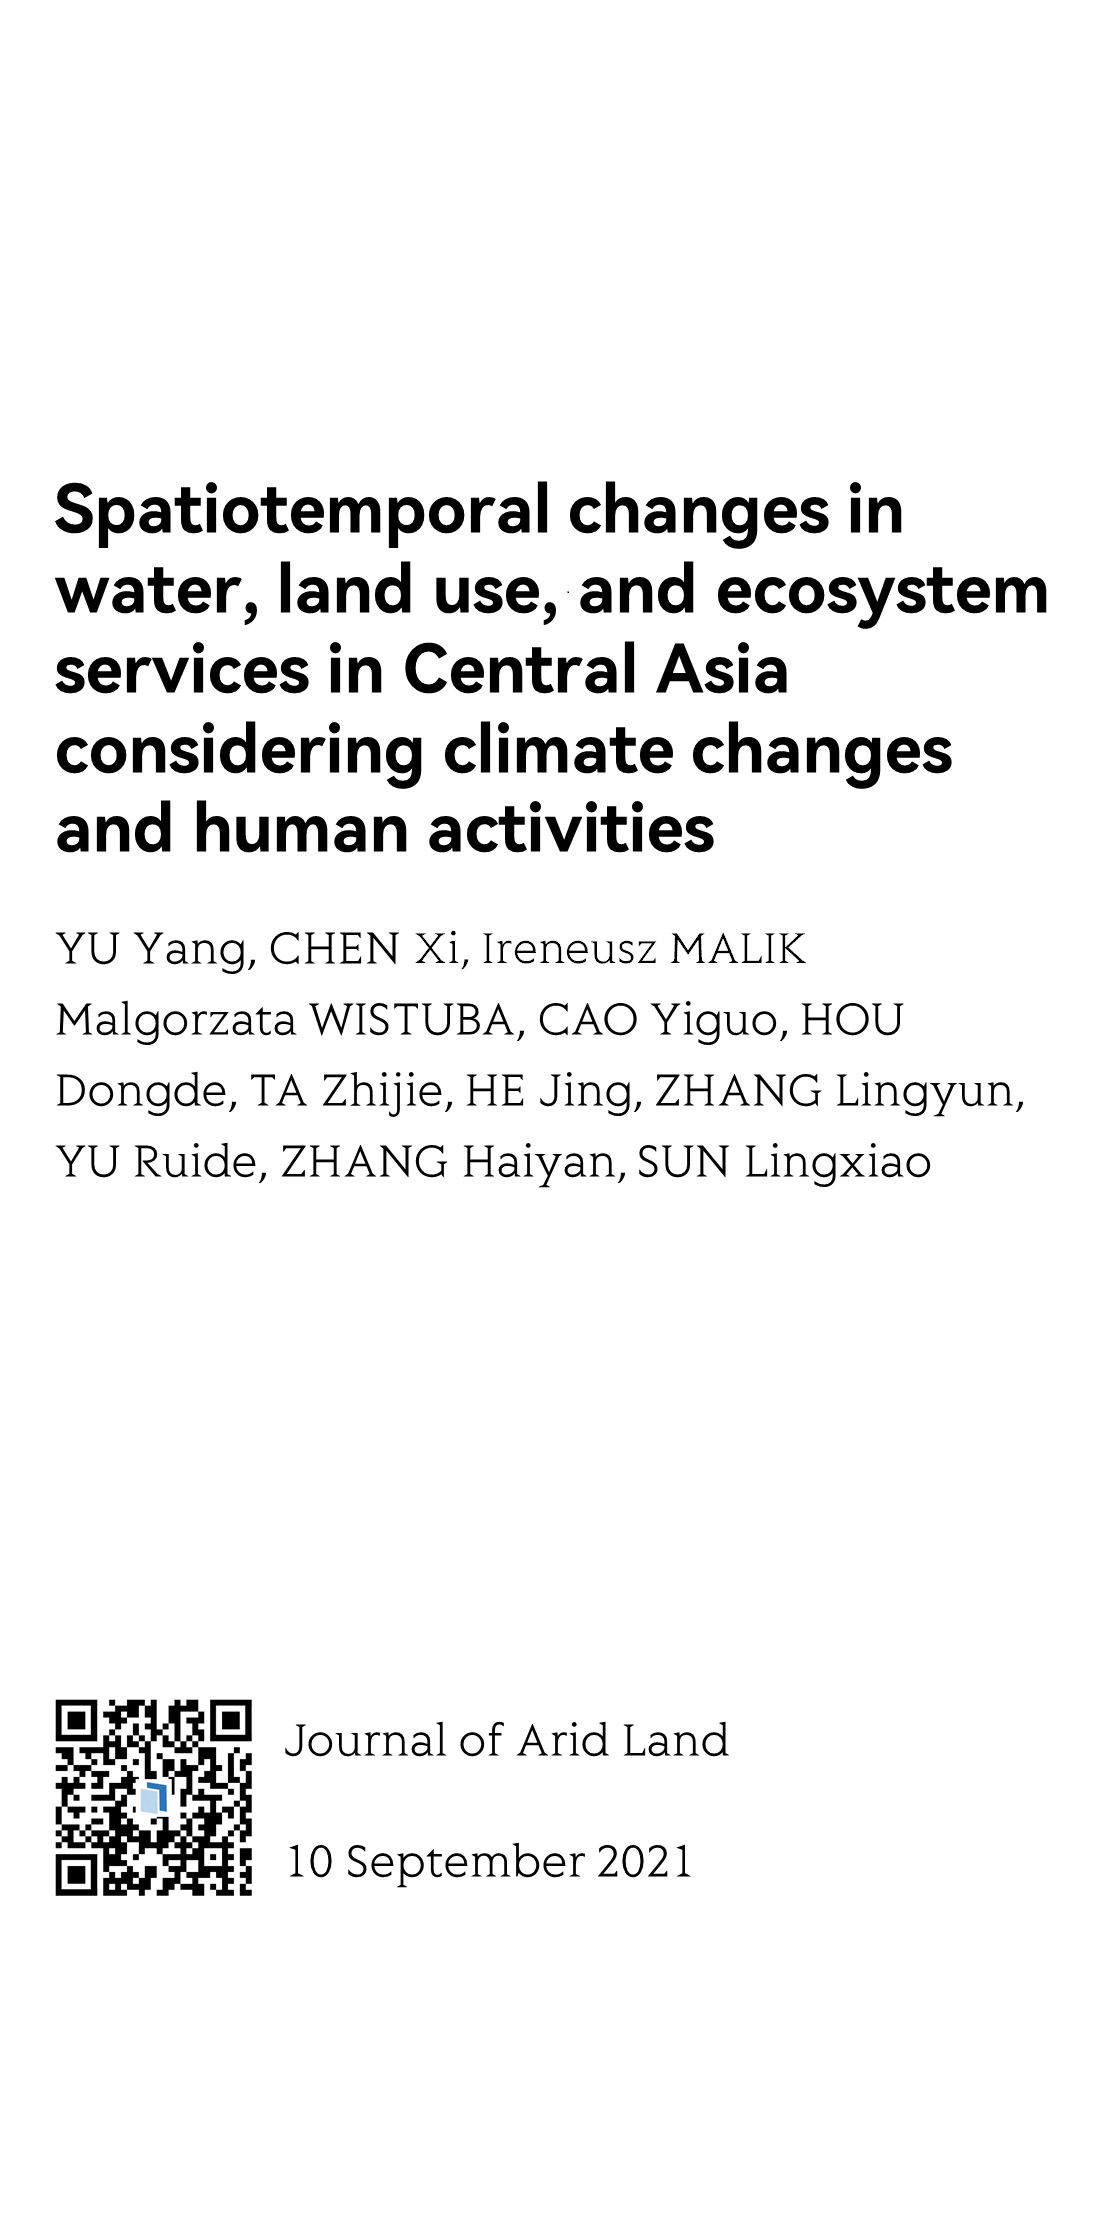 Spatiotemporal changes in water, land use, and ecosystem services in Central Asia considering climate changes and human activities_1